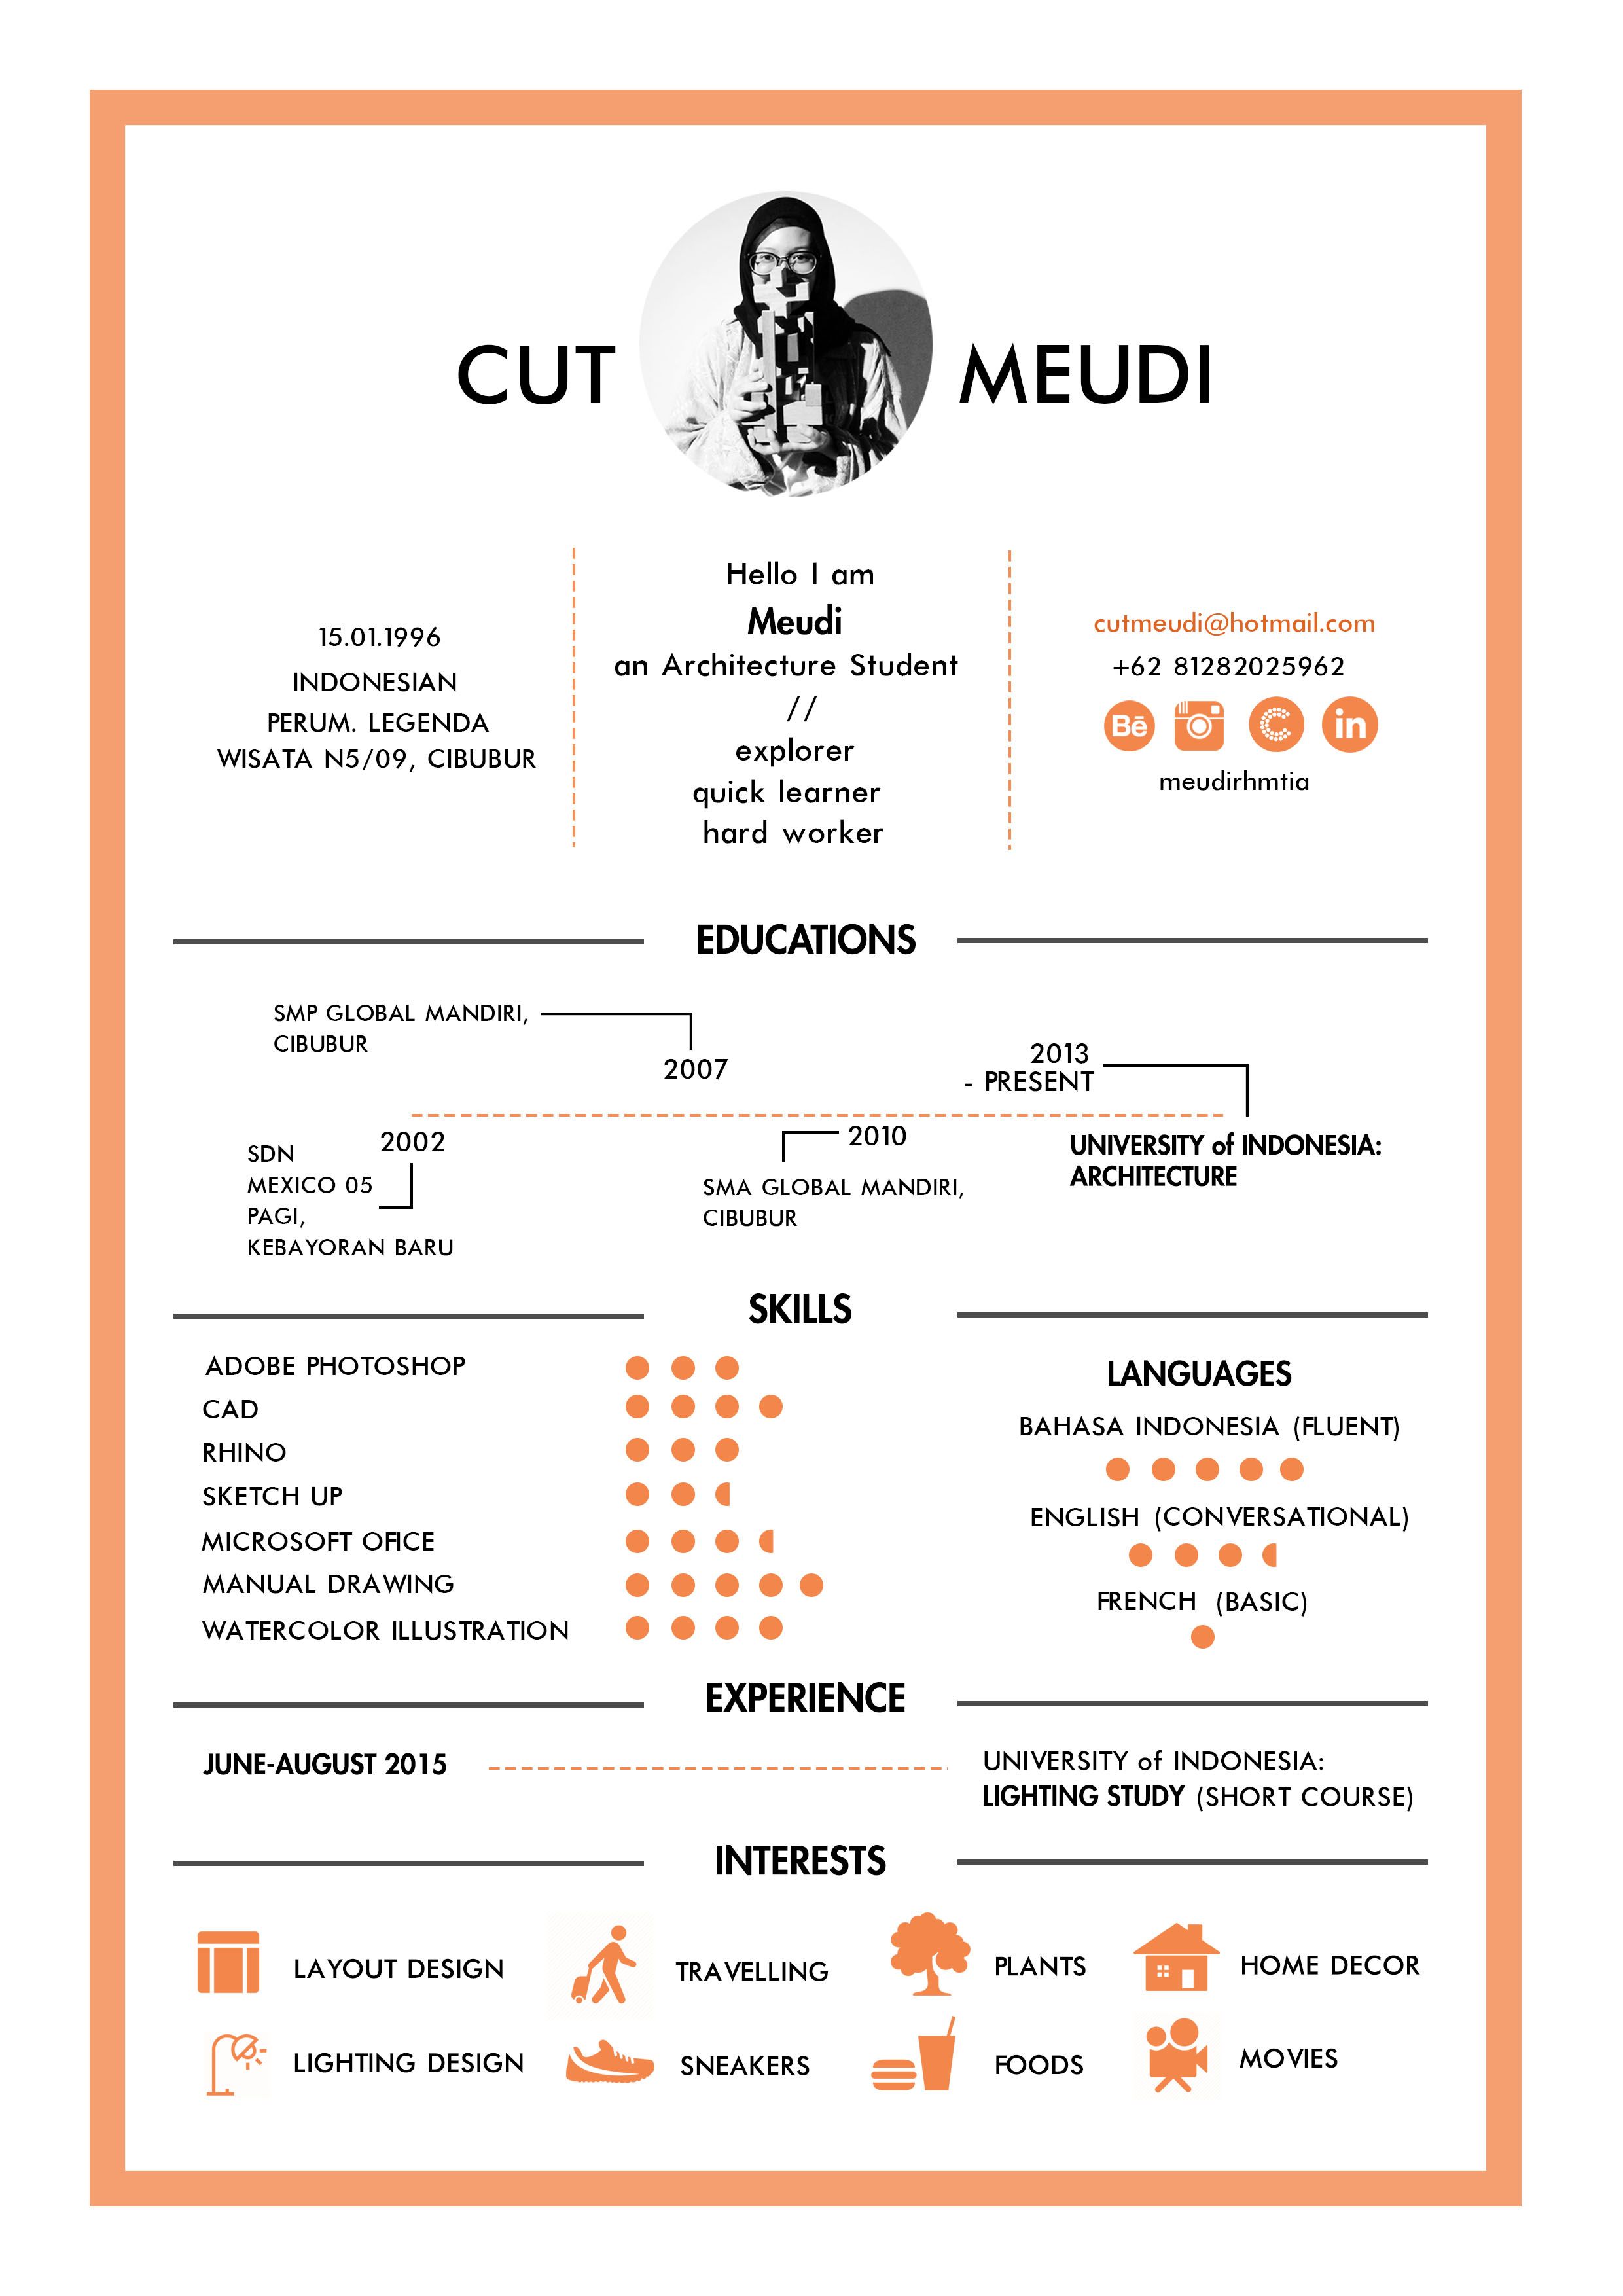 cv by cut meudi an architecture student from university of